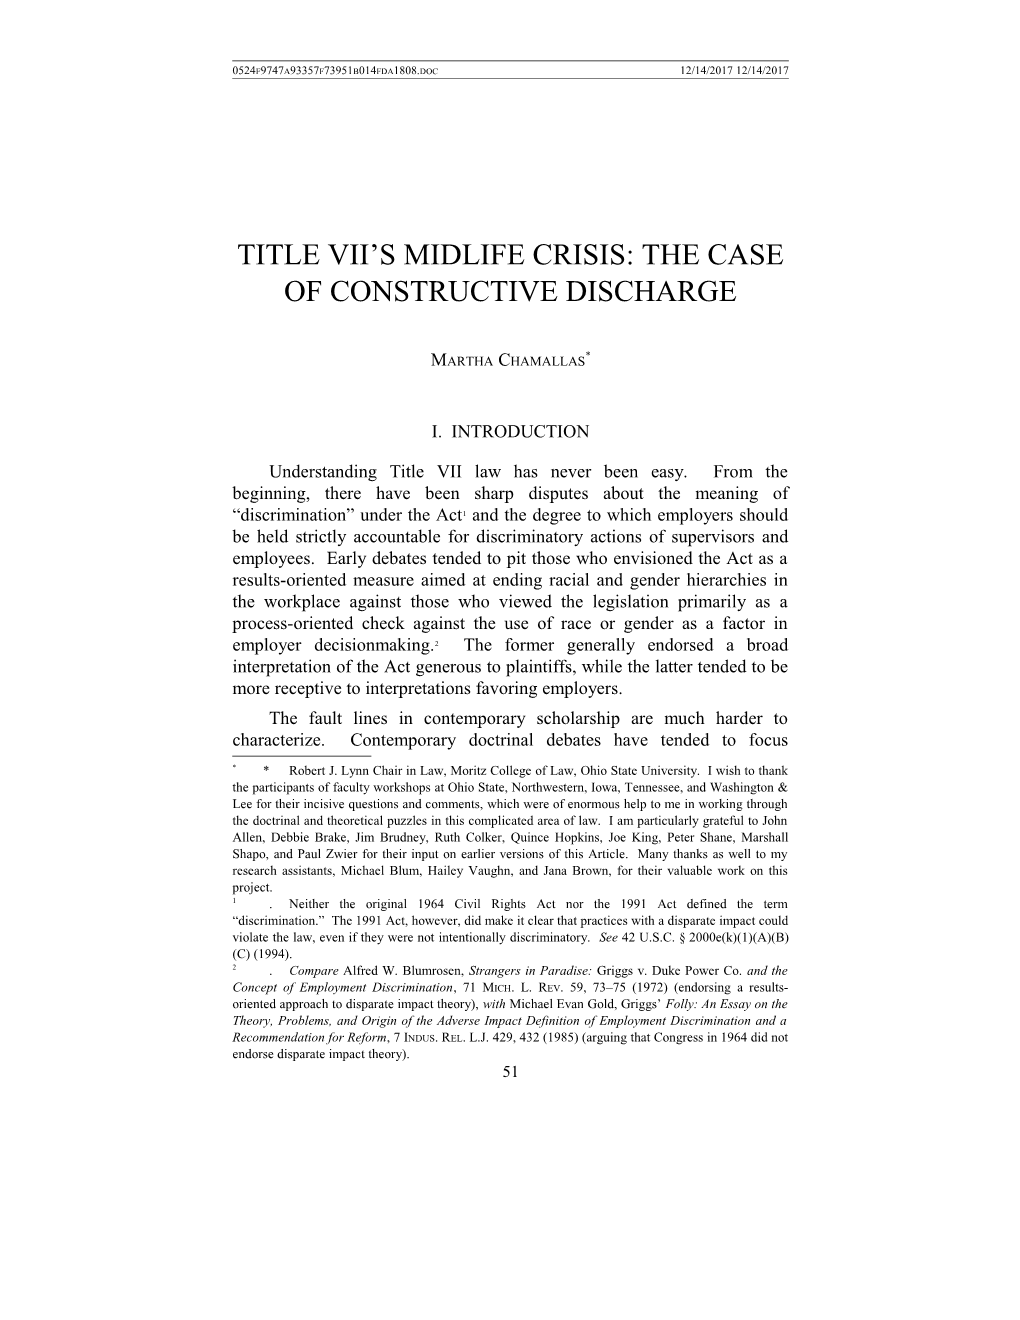 Title Vii’S Midlife Crisis: The Case Of Constructive Discharge